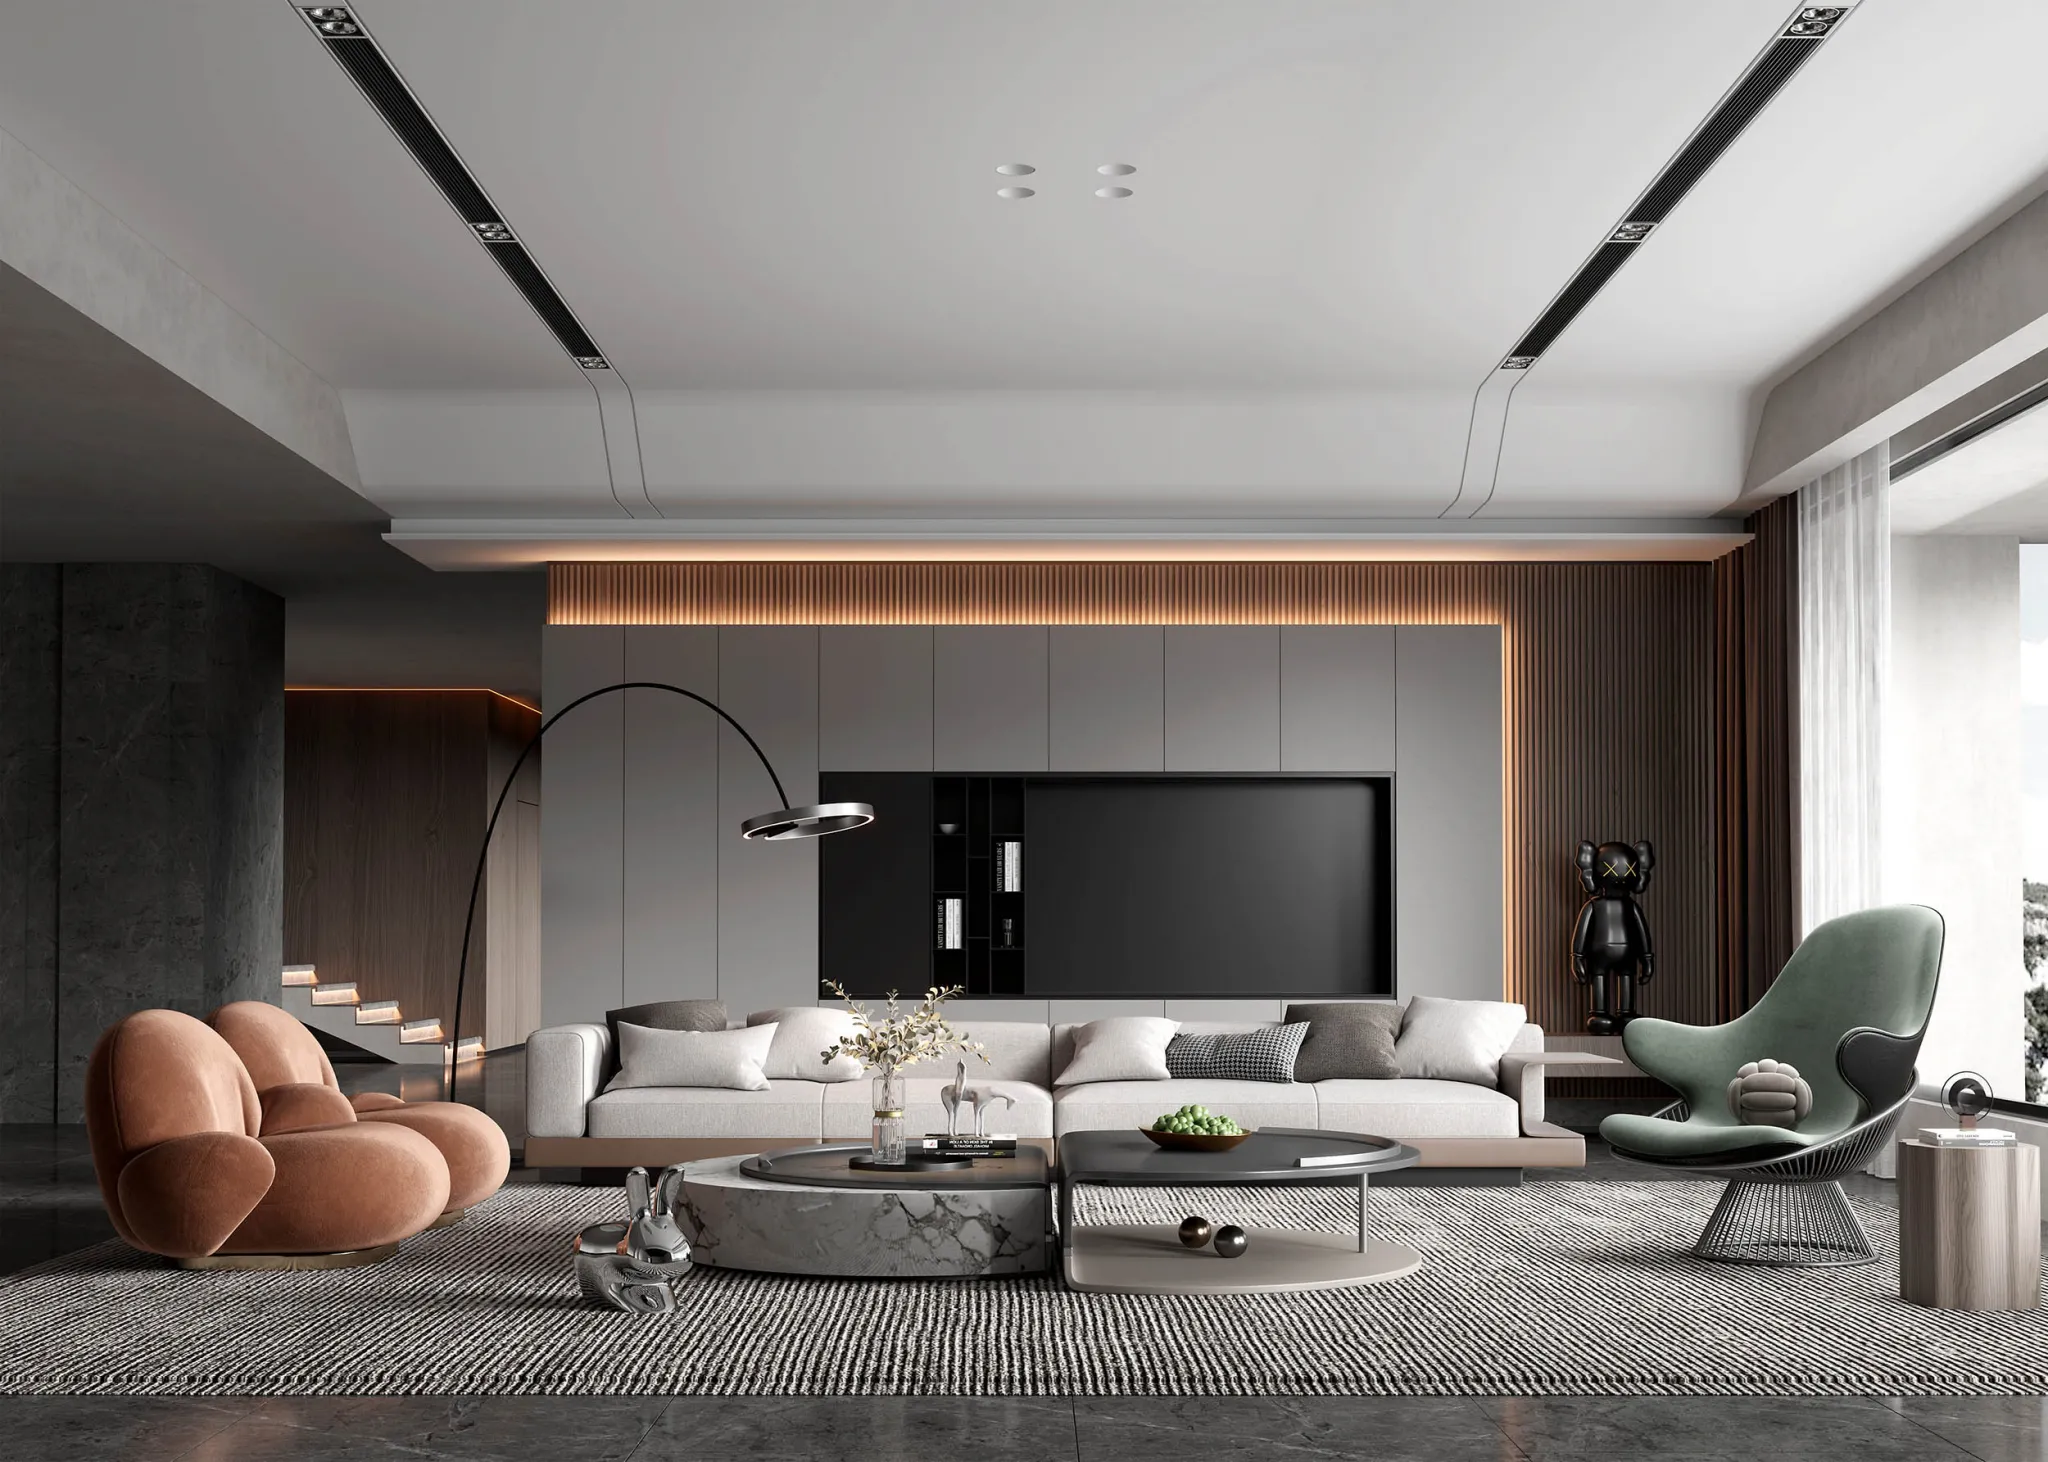 HOUSE SPACE 3D SCENES – LIVING ROOM – 0164